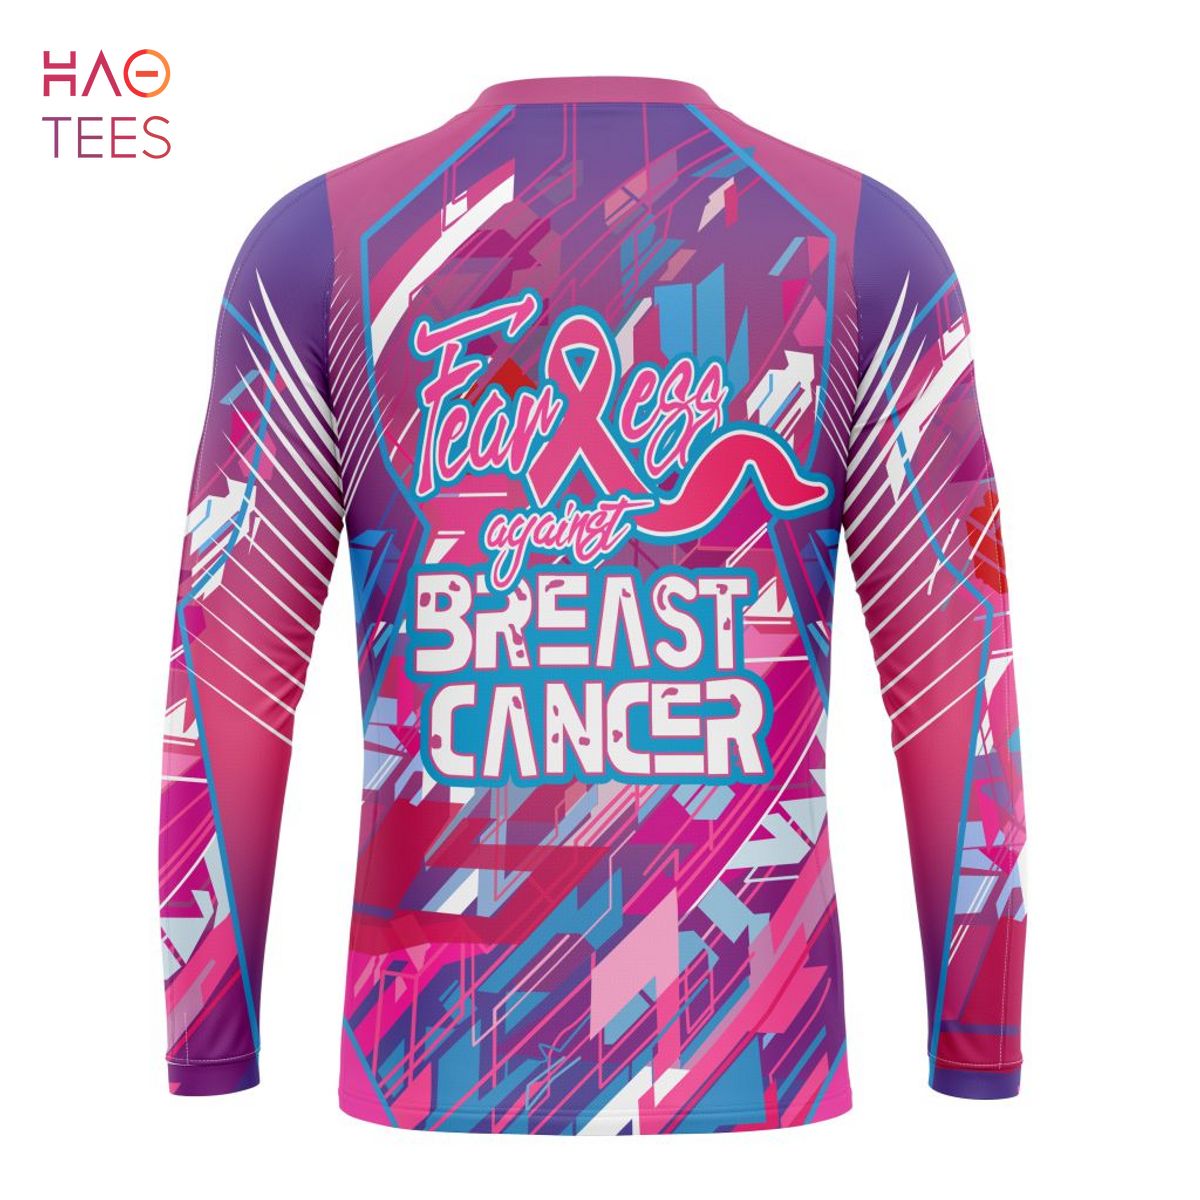 BEST NFL Seattle Seahawks, Specialized Design I Pink I Can! Fearless Again Breast Cancer 3D Hoodie